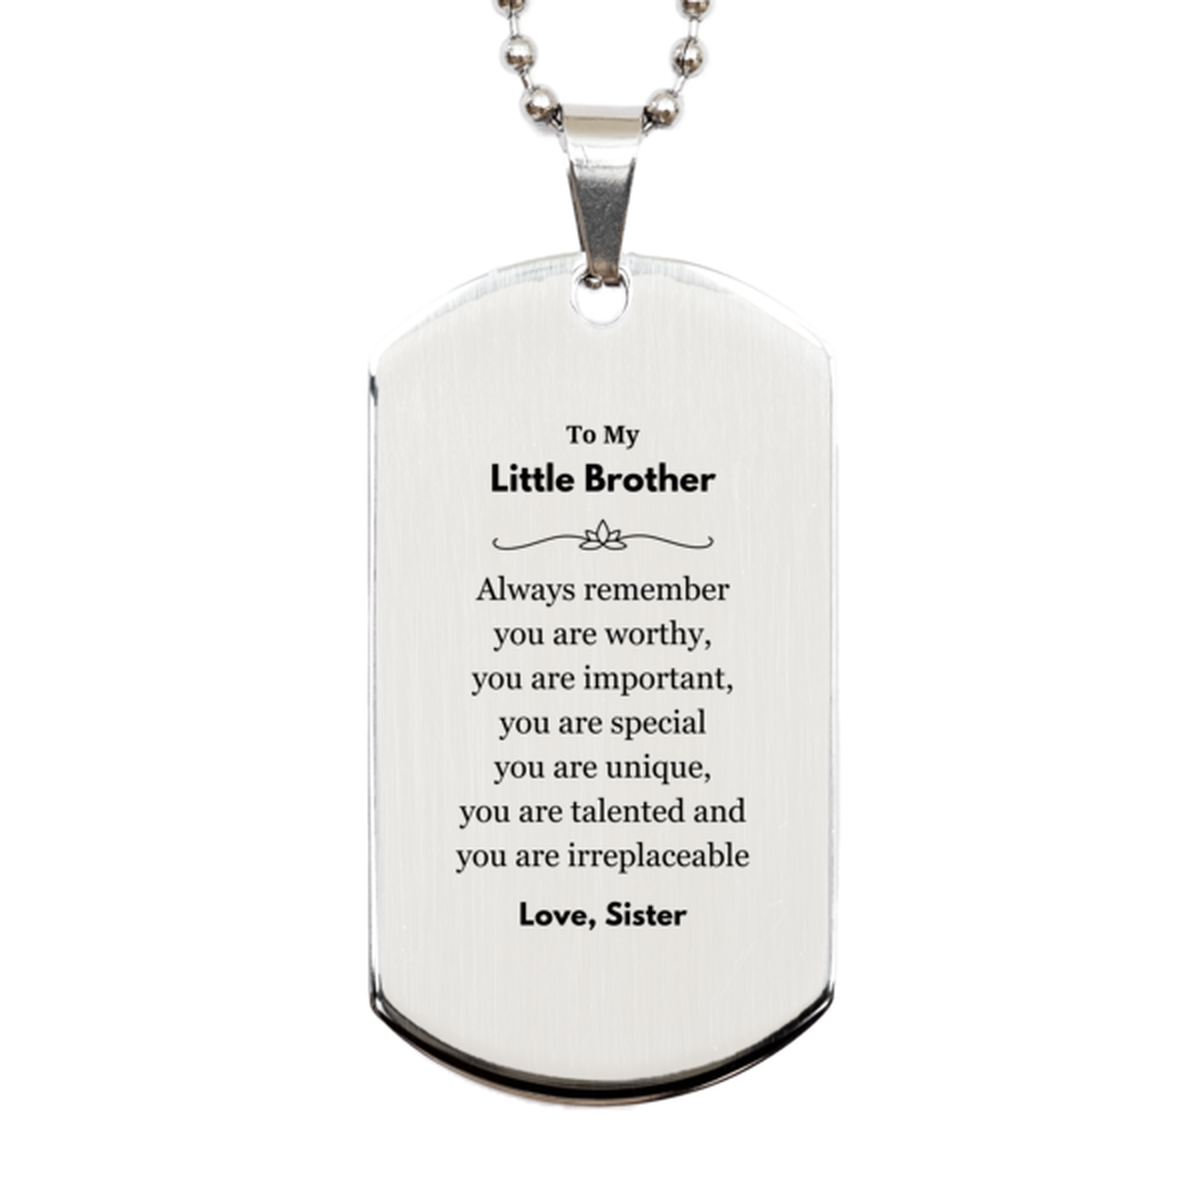 Little Brother Birthday Gifts from Sister, Inspirational Silver Dog Tag for Little Brother Christmas Graduation Gifts for Little Brother Always remember you are worthy, you are important. Love, Sister